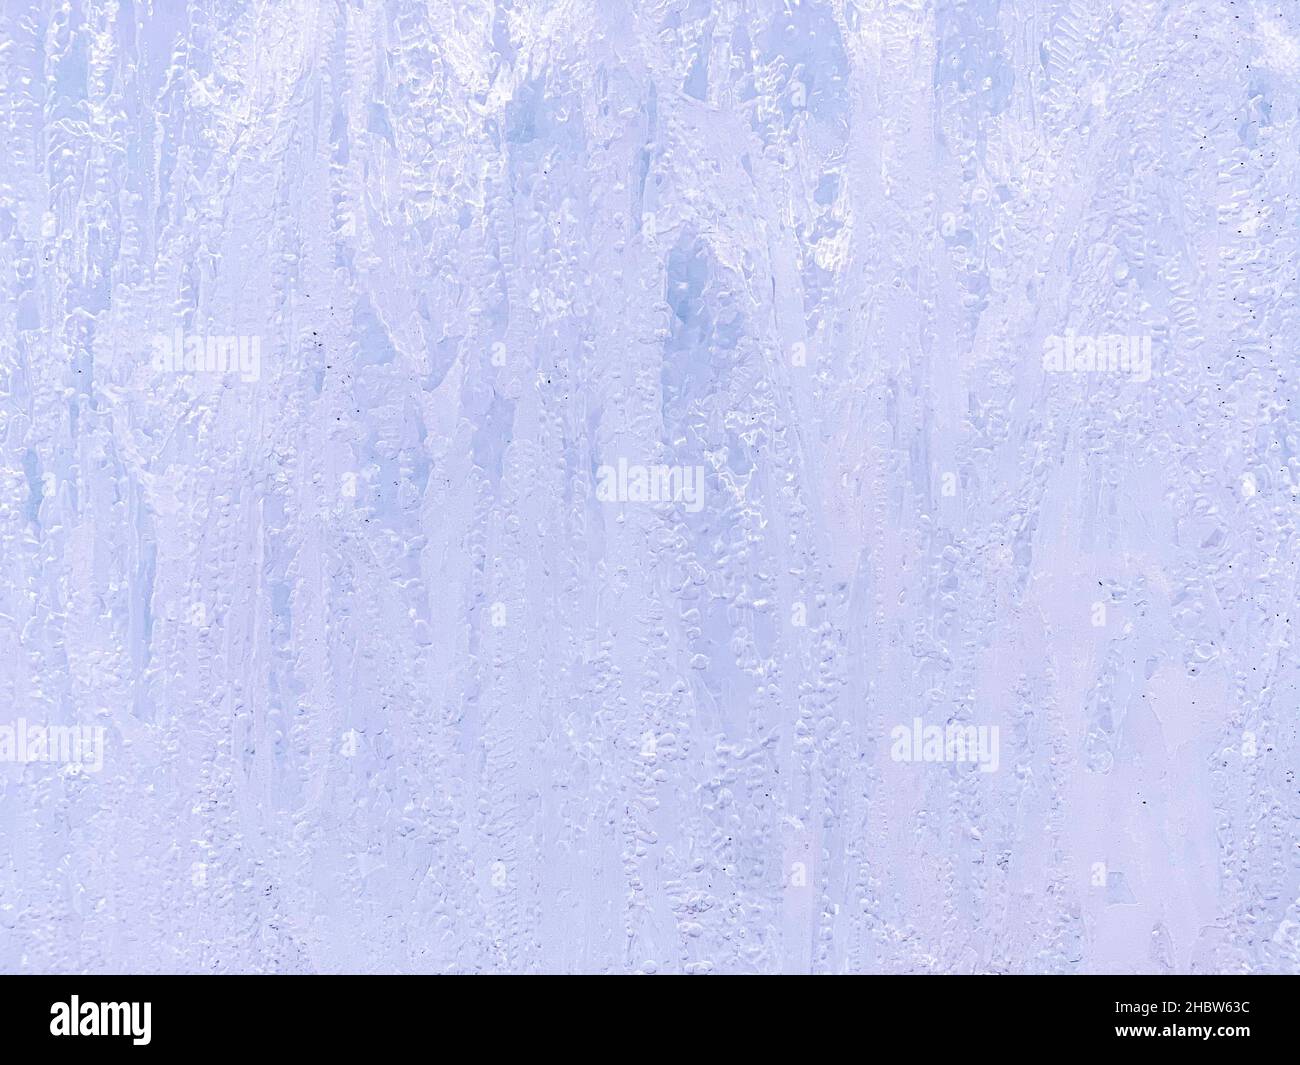 Abstract background. Vertical ice smudges of purple purple color with a pearlescent tint. Stock Photo